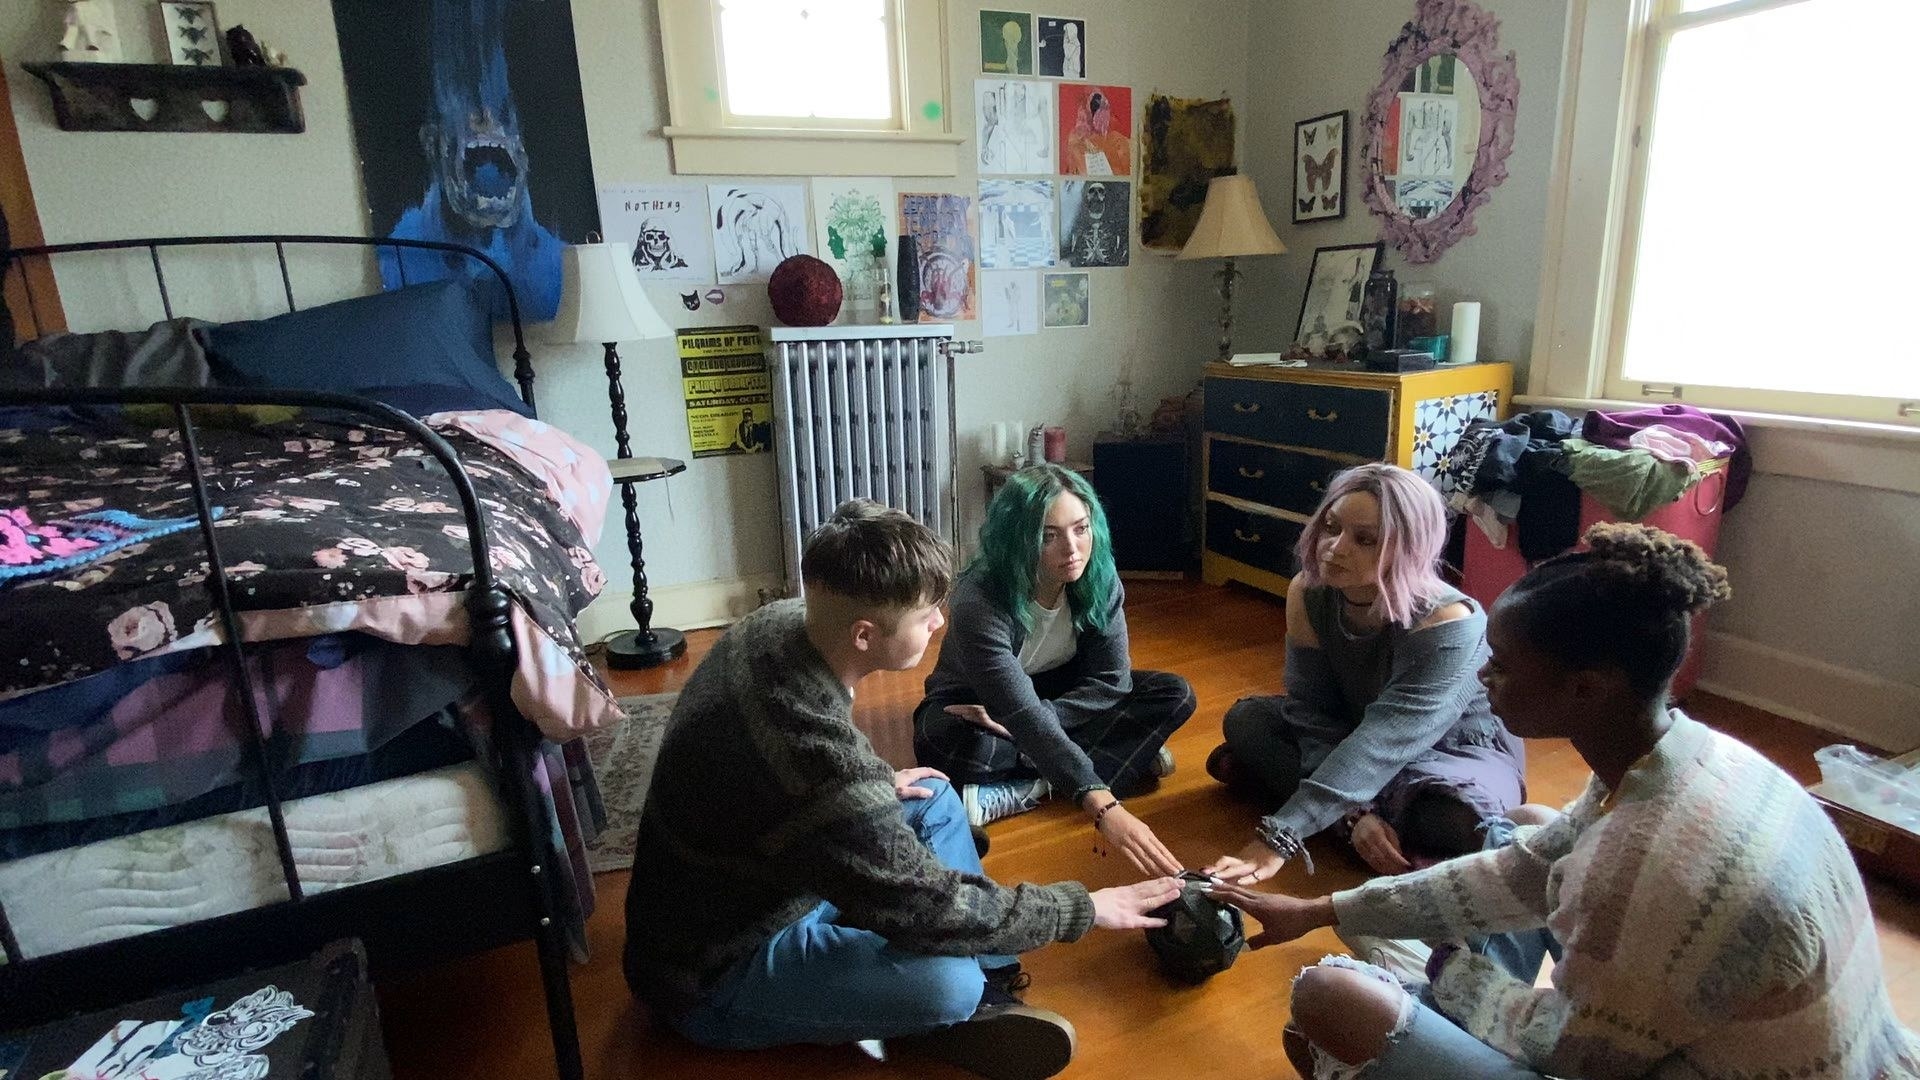 Zooza and friends sitting in a bedroom with their hands on a ball